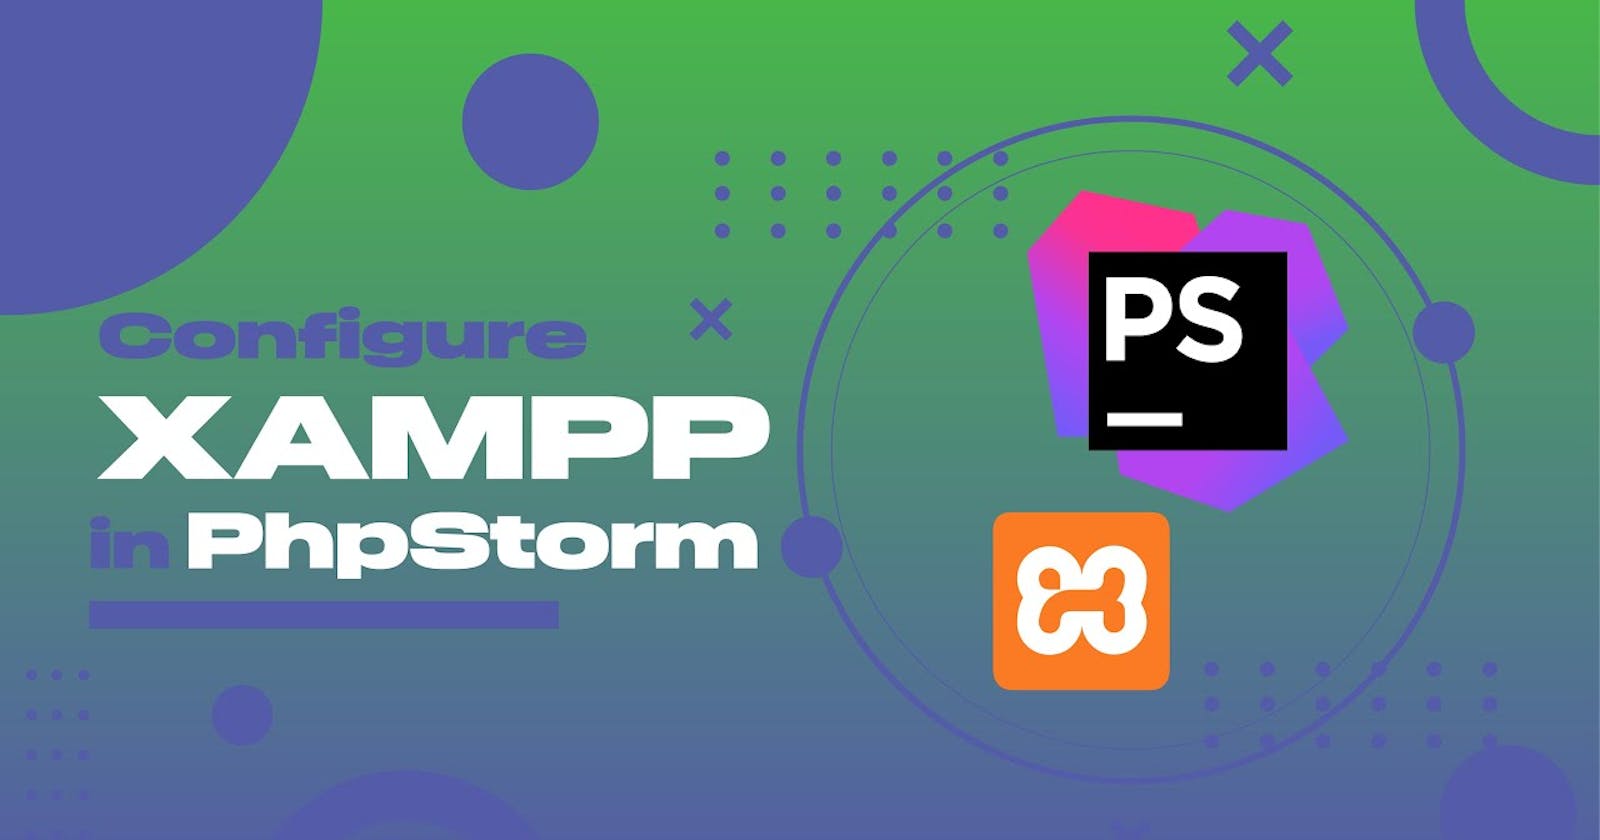 Configure XAMPP in PhpStorm 2020.3.1 and preview on browser